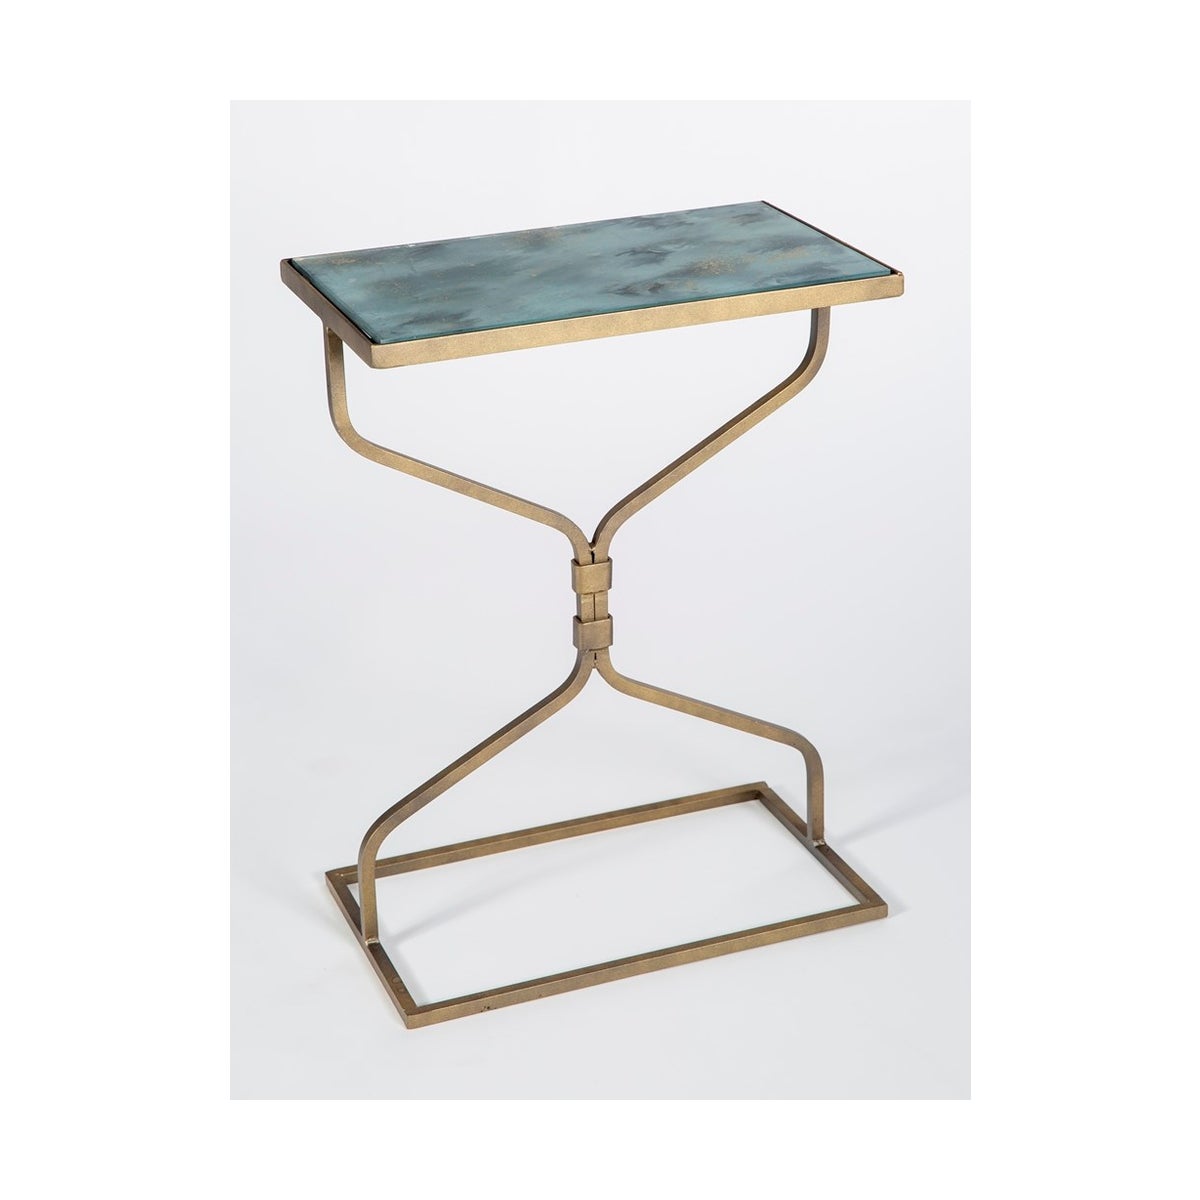 Cole Accent Table in Antique Gold with Glass Shelves in Smooth Stone Finish